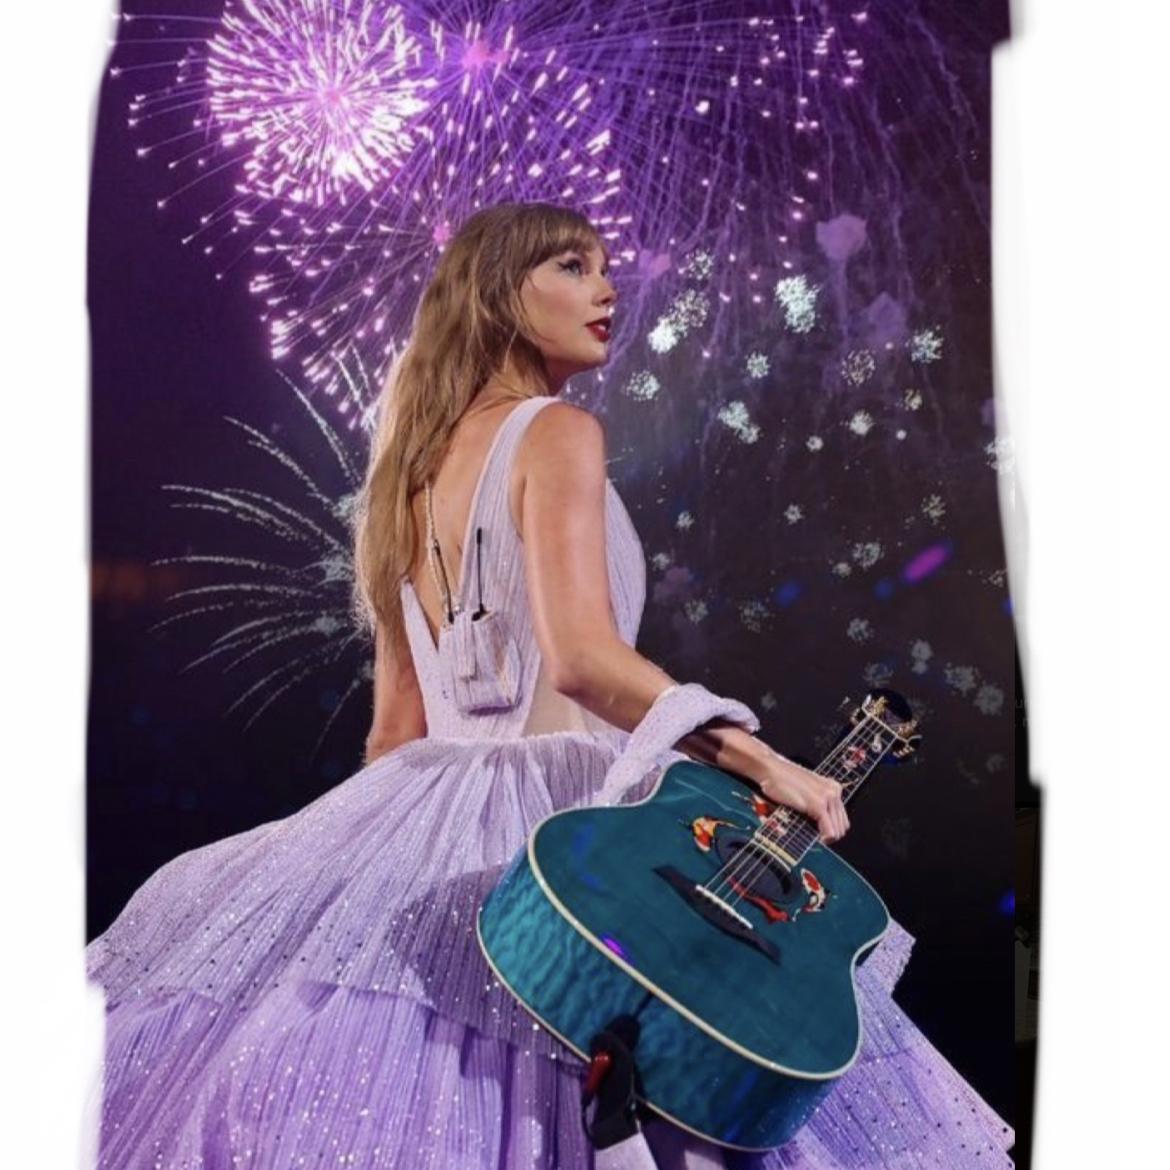 Taylor Swift 's images